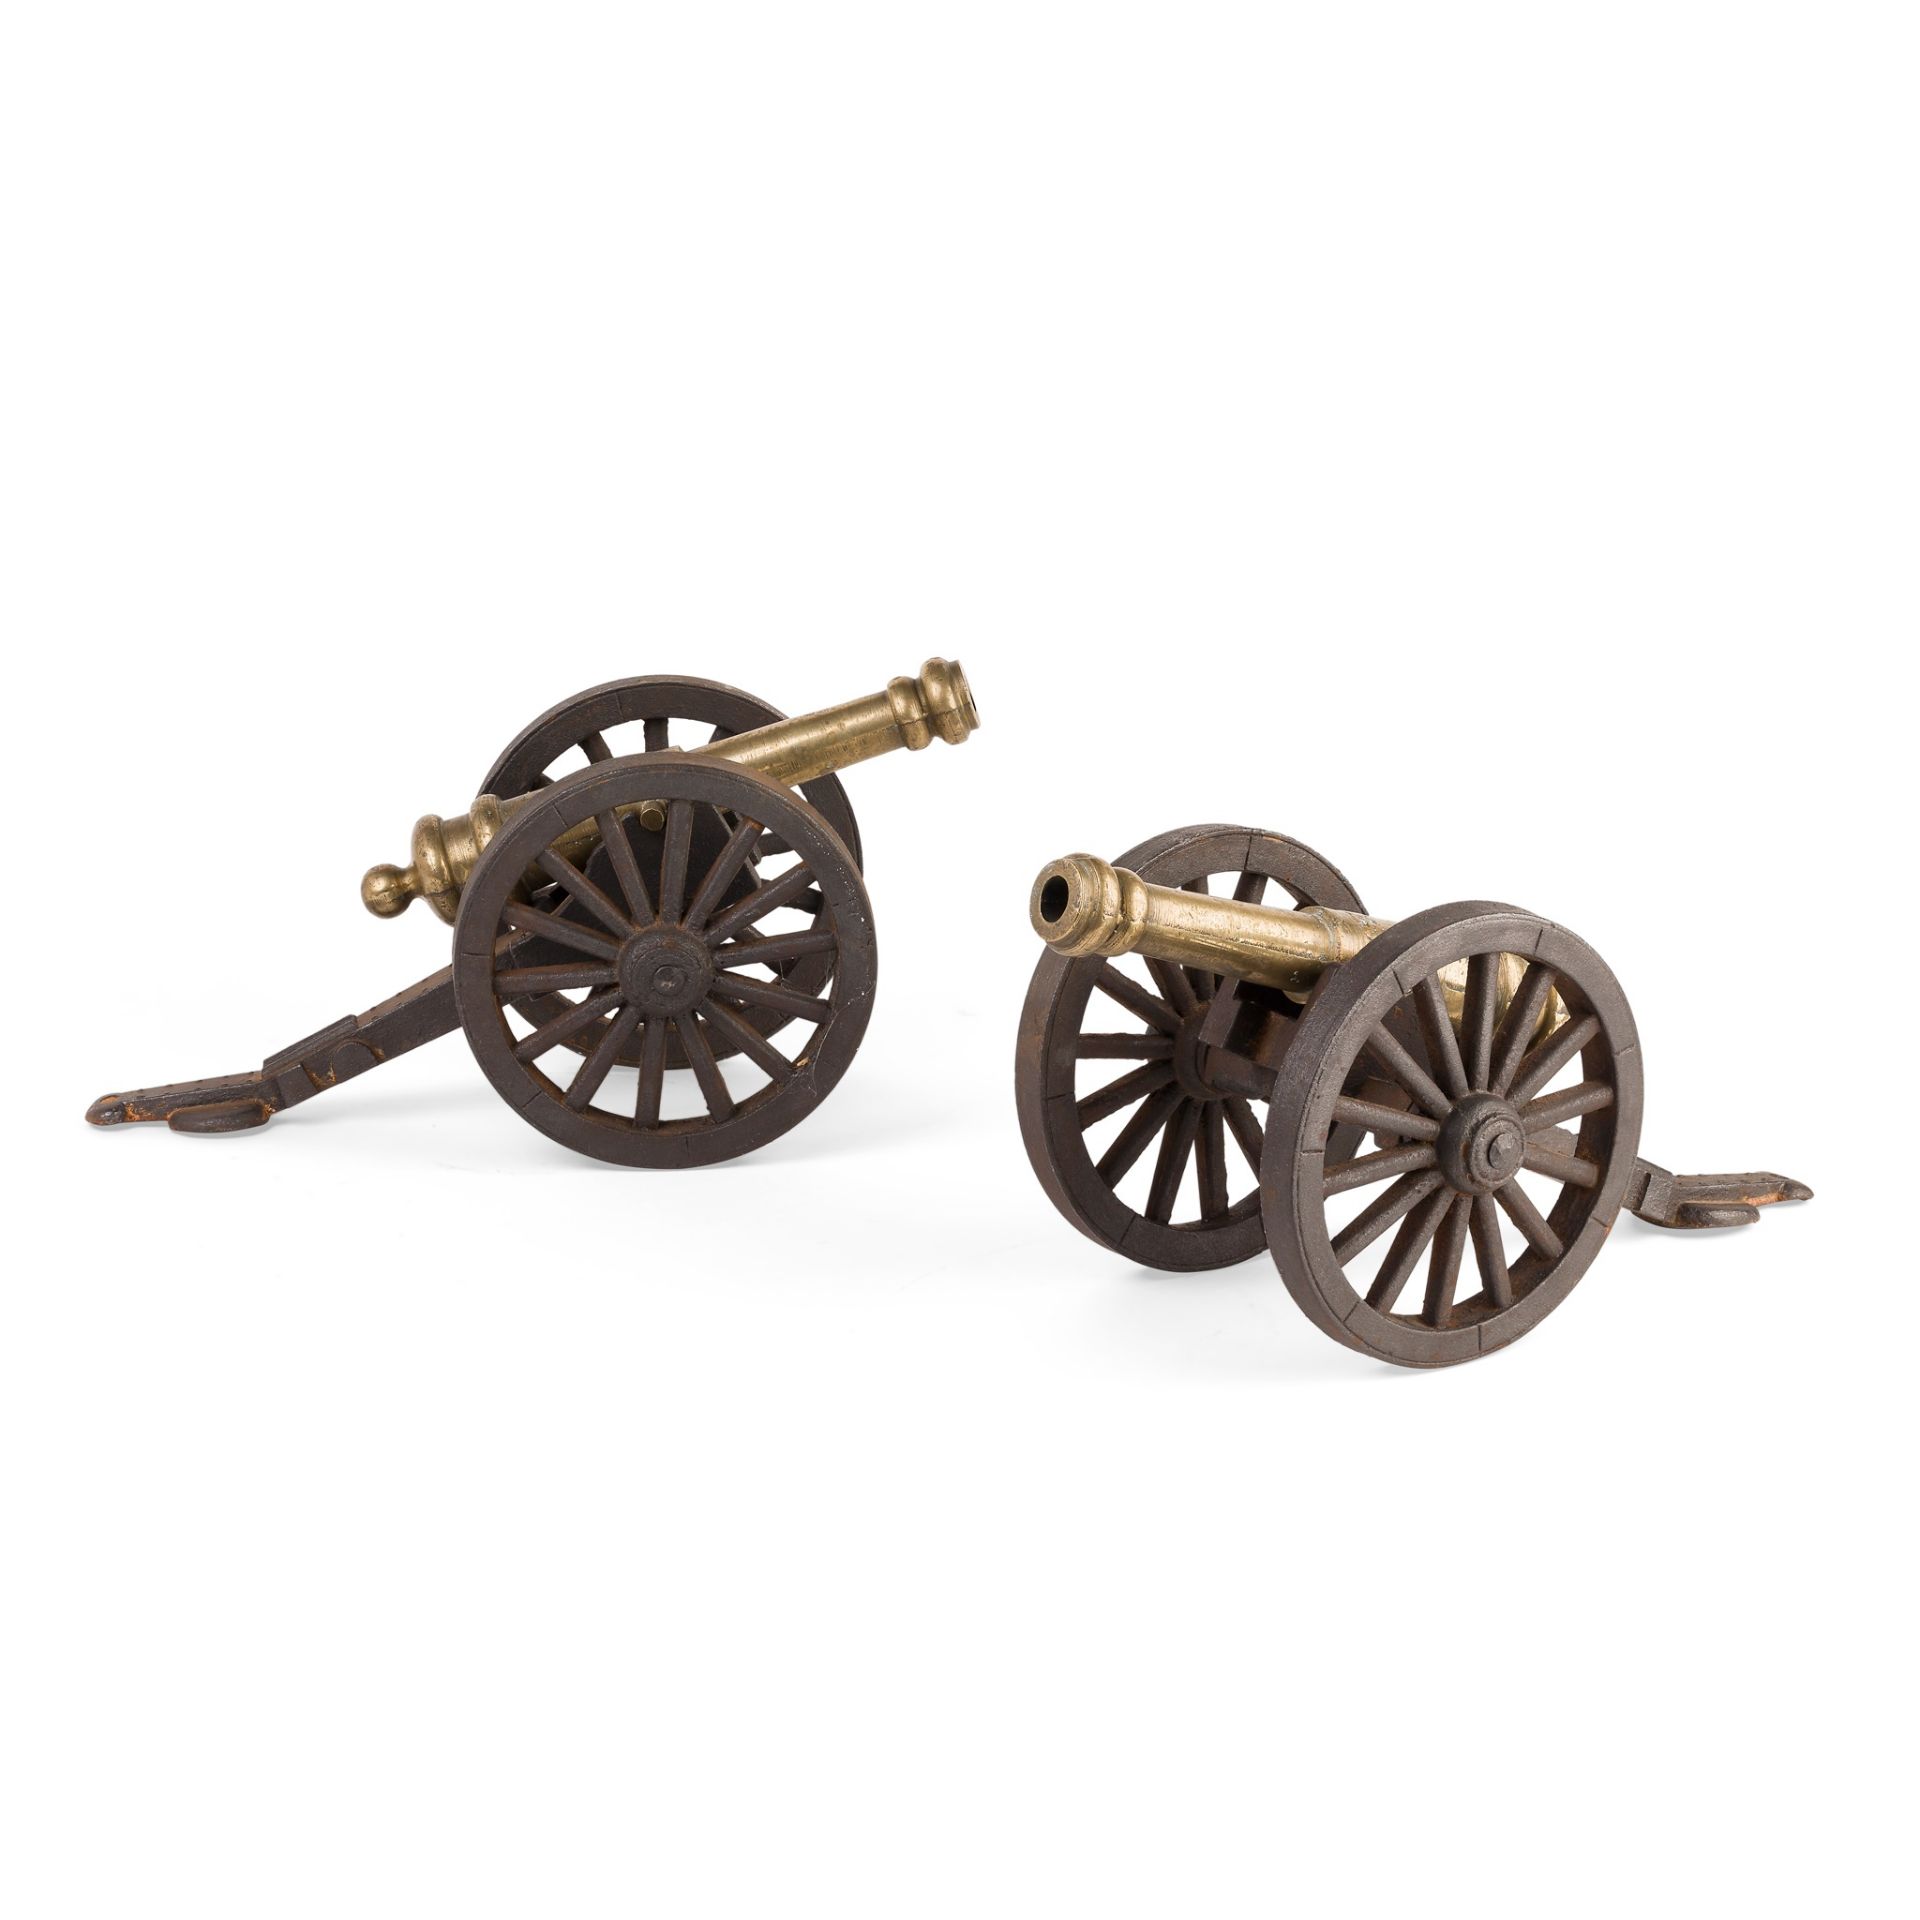 PAIR OF BRASS AND IRON SIGNAL CANNONS LATE 19TH/EARLY 20TH CENTURY